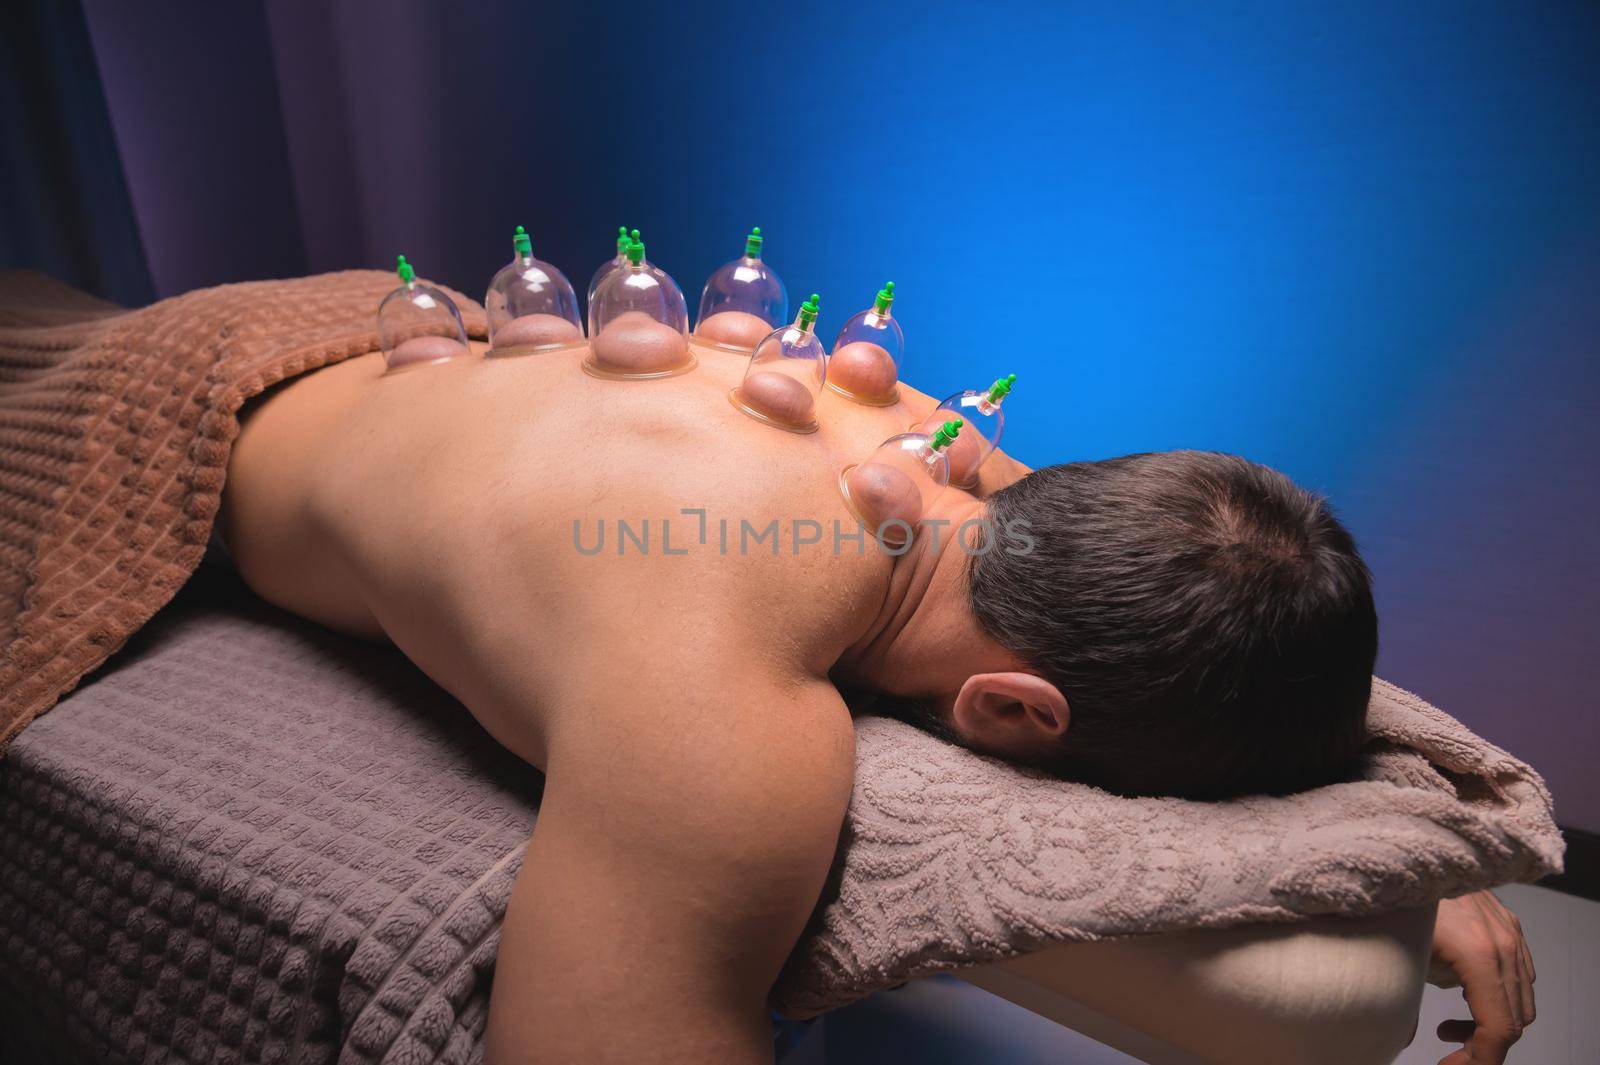 Cup massage in general. Vacuum jars for back massage for a man. Massage with vacuum cups. Cupping treatments for back pain relief. Caucasian man lies face down with mounted vacuum cups on his back.